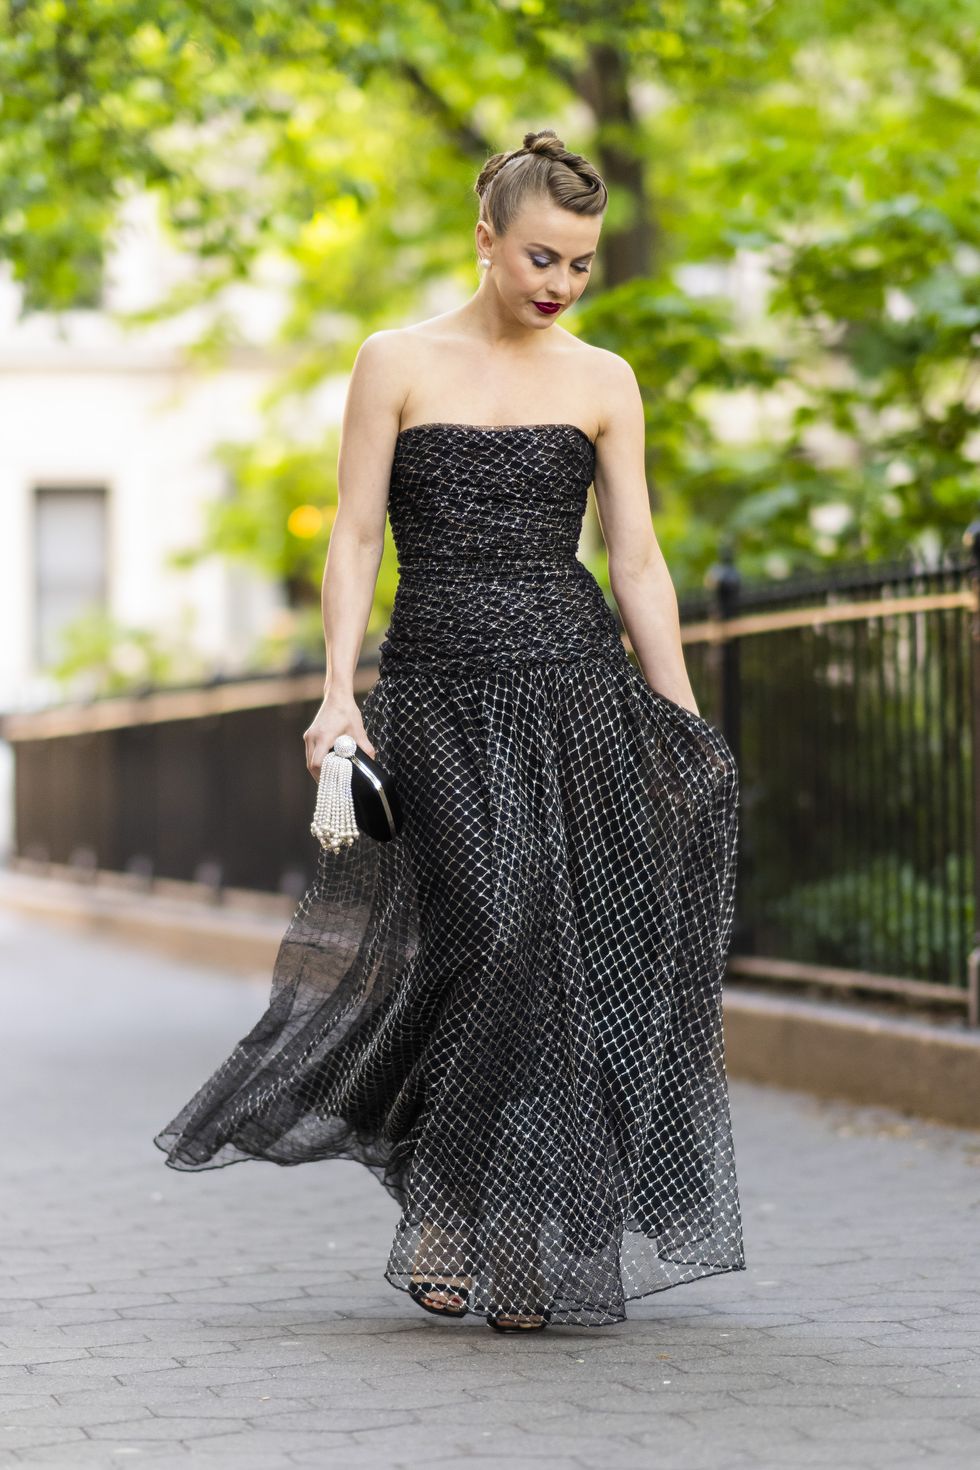 julianne hough is seen wearing a vintage haute couture yves saint laurent dress with shoes and a handbag by roger vivier in washington square park